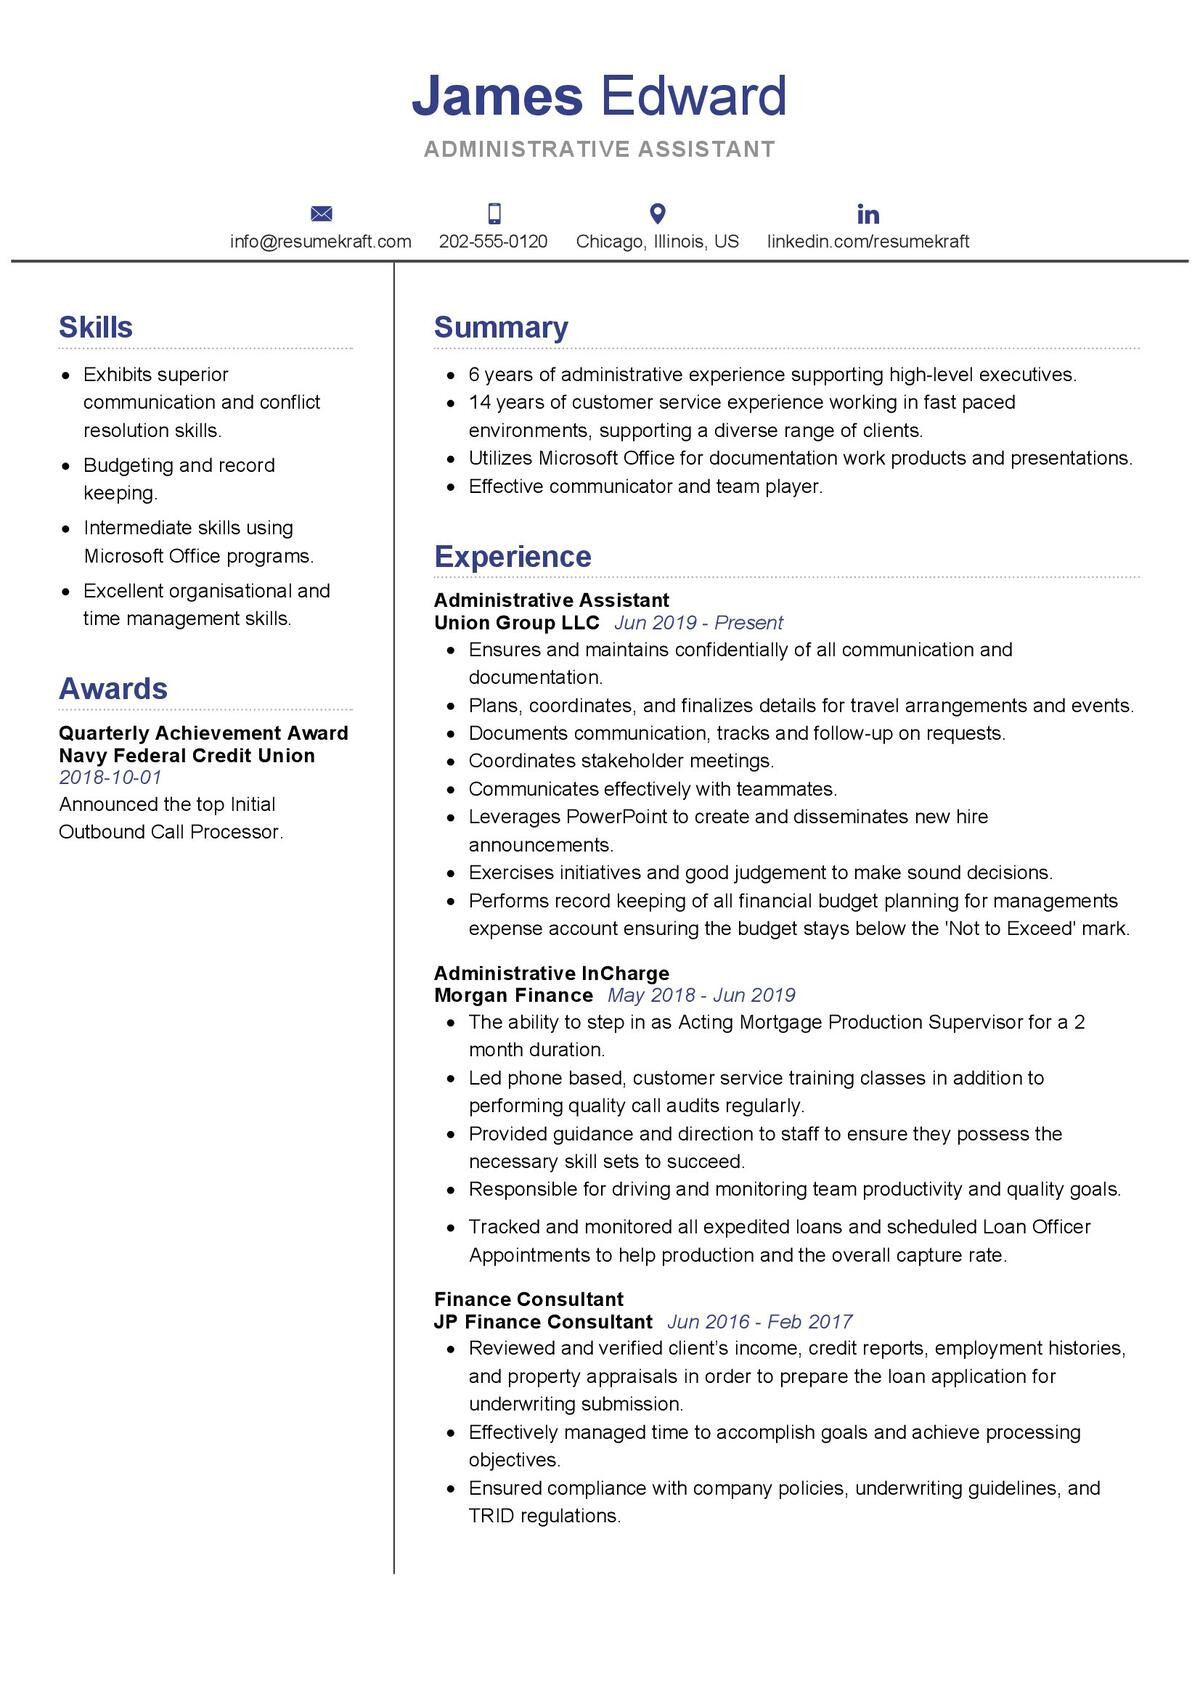 Sample Resume Administrative assistant Customer Service Administrative assistant Resume Sample 2021 Writing Guide …